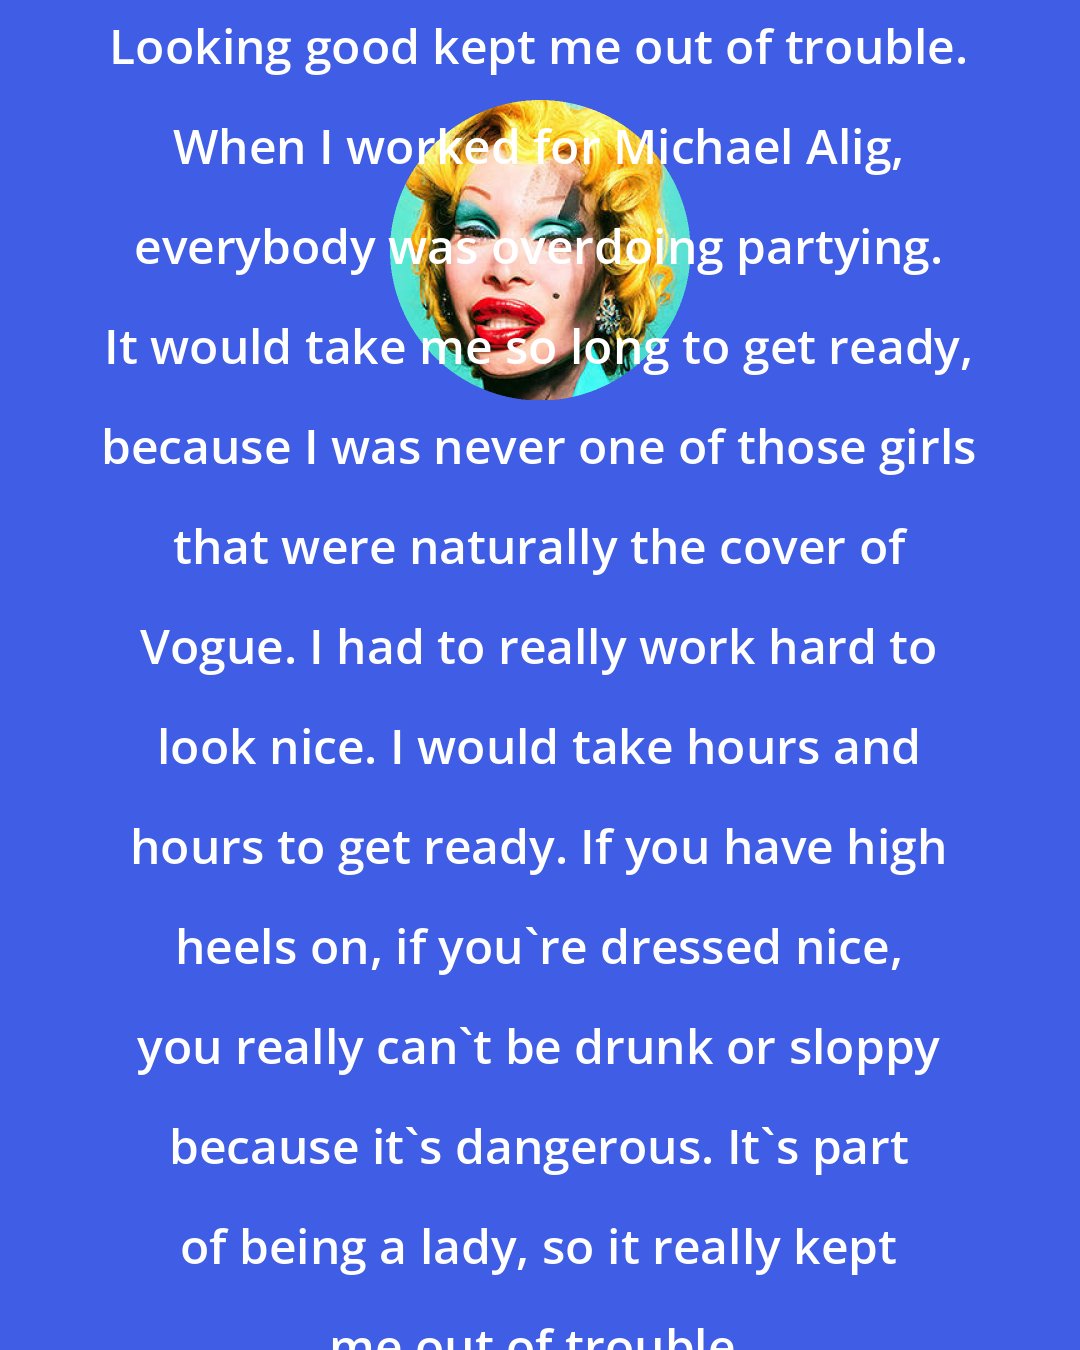 Amanda Lepore: Looking good kept me out of trouble. When I worked for Michael Alig, everybody was overdoing partying. It would take me so long to get ready, because I was never one of those girls that were naturally the cover of Vogue. I had to really work hard to look nice. I would take hours and hours to get ready. If you have high heels on, if you're dressed nice, you really can't be drunk or sloppy because it's dangerous. It's part of being a lady, so it really kept me out of trouble.